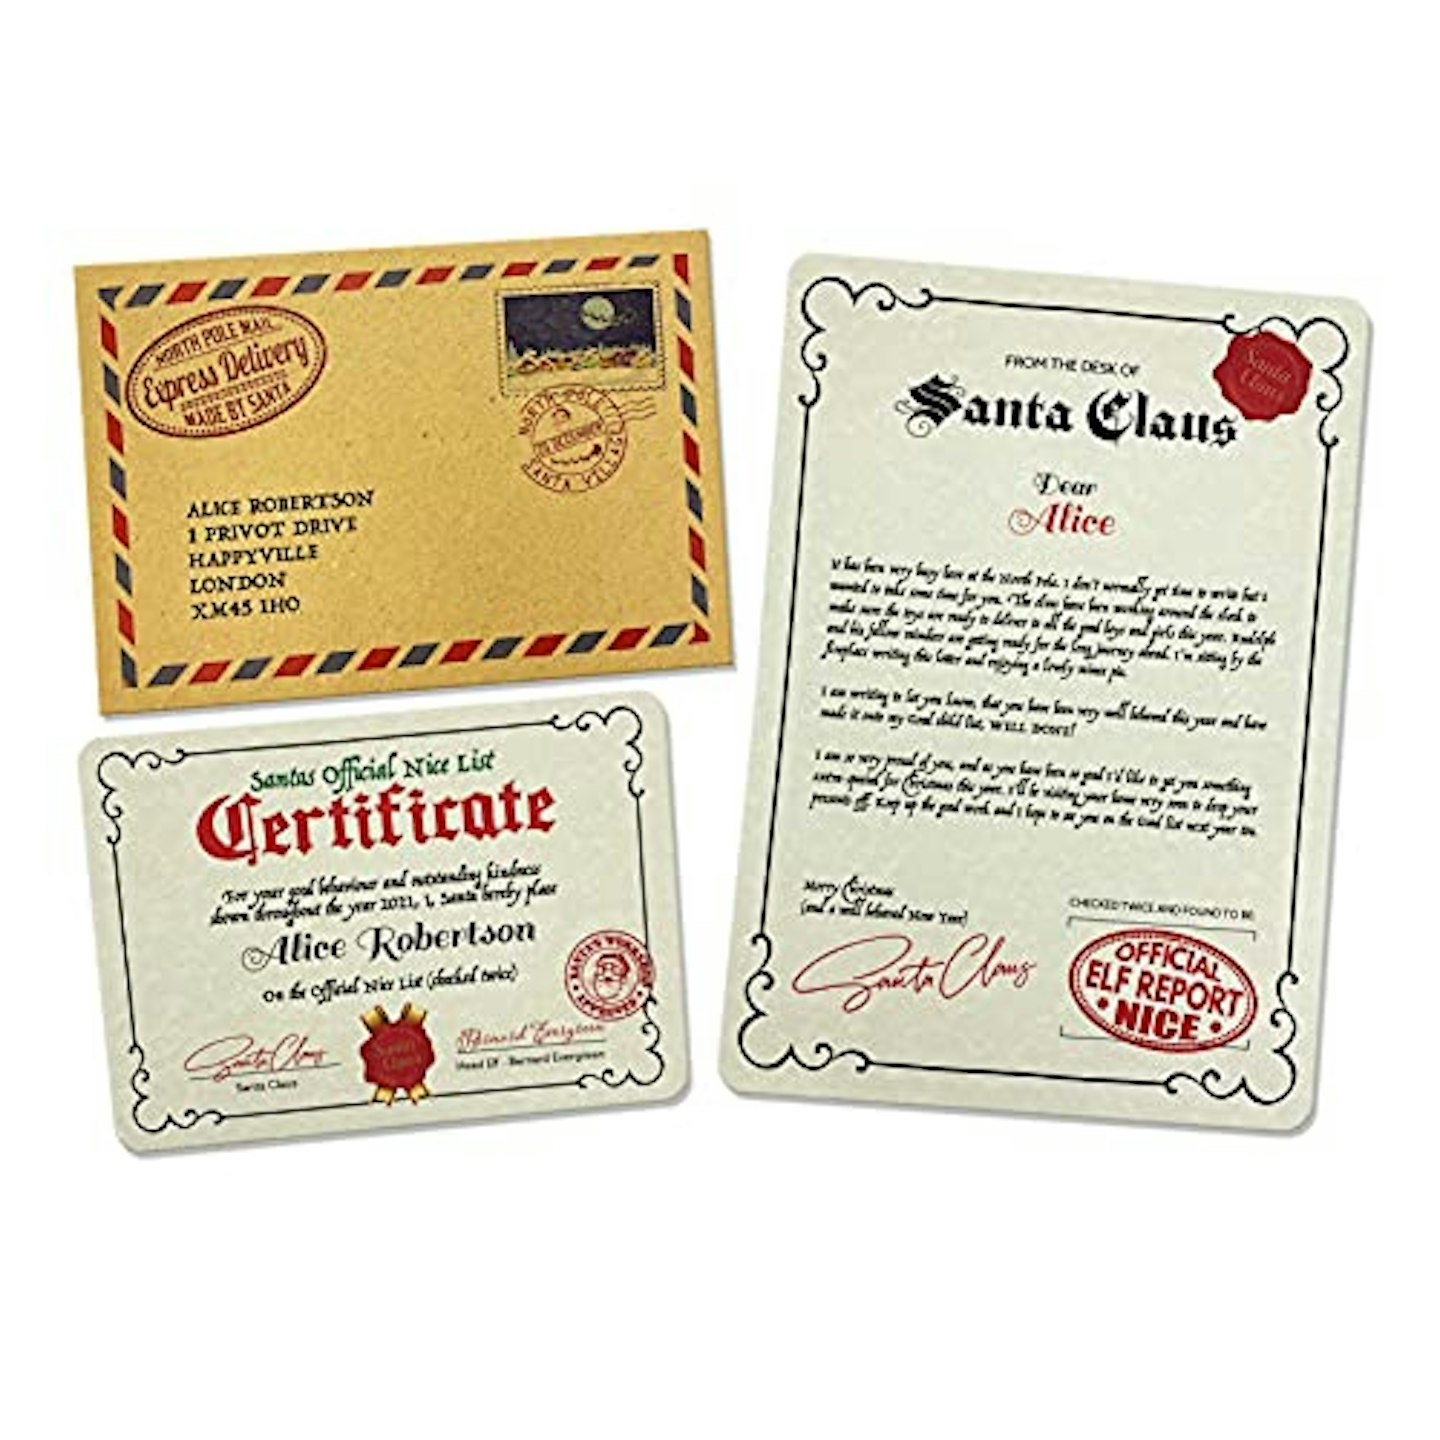 The UK Factory Personalised Letter and Certificate From Santa Claus